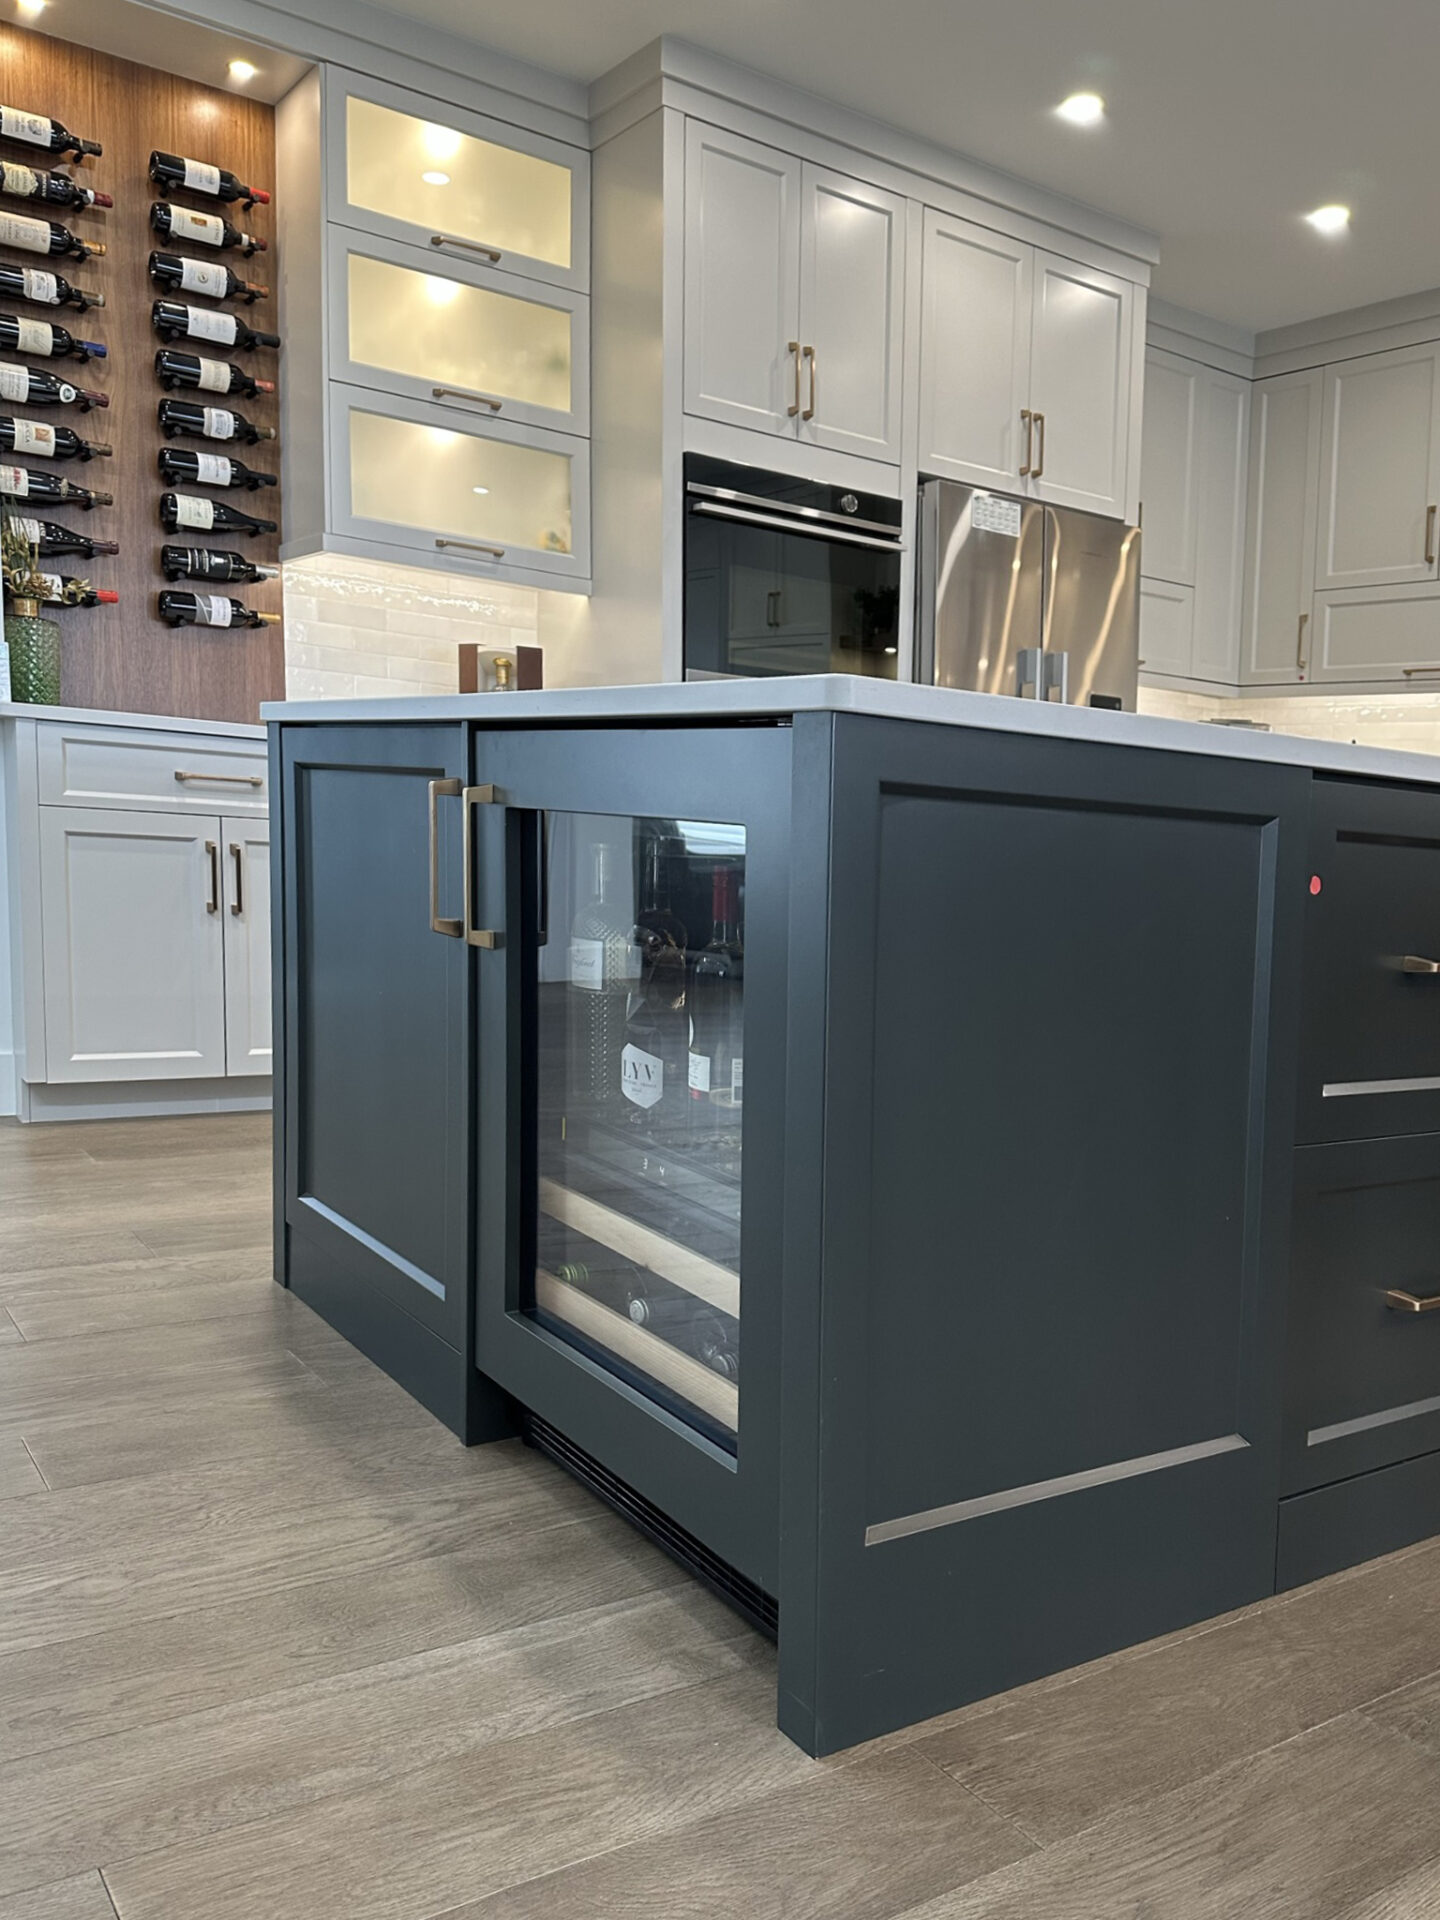 A modern kitchen with a gray island featuring a wine cooler, white cabinetry, a wine rack with bottles, and stainless steel appliances.